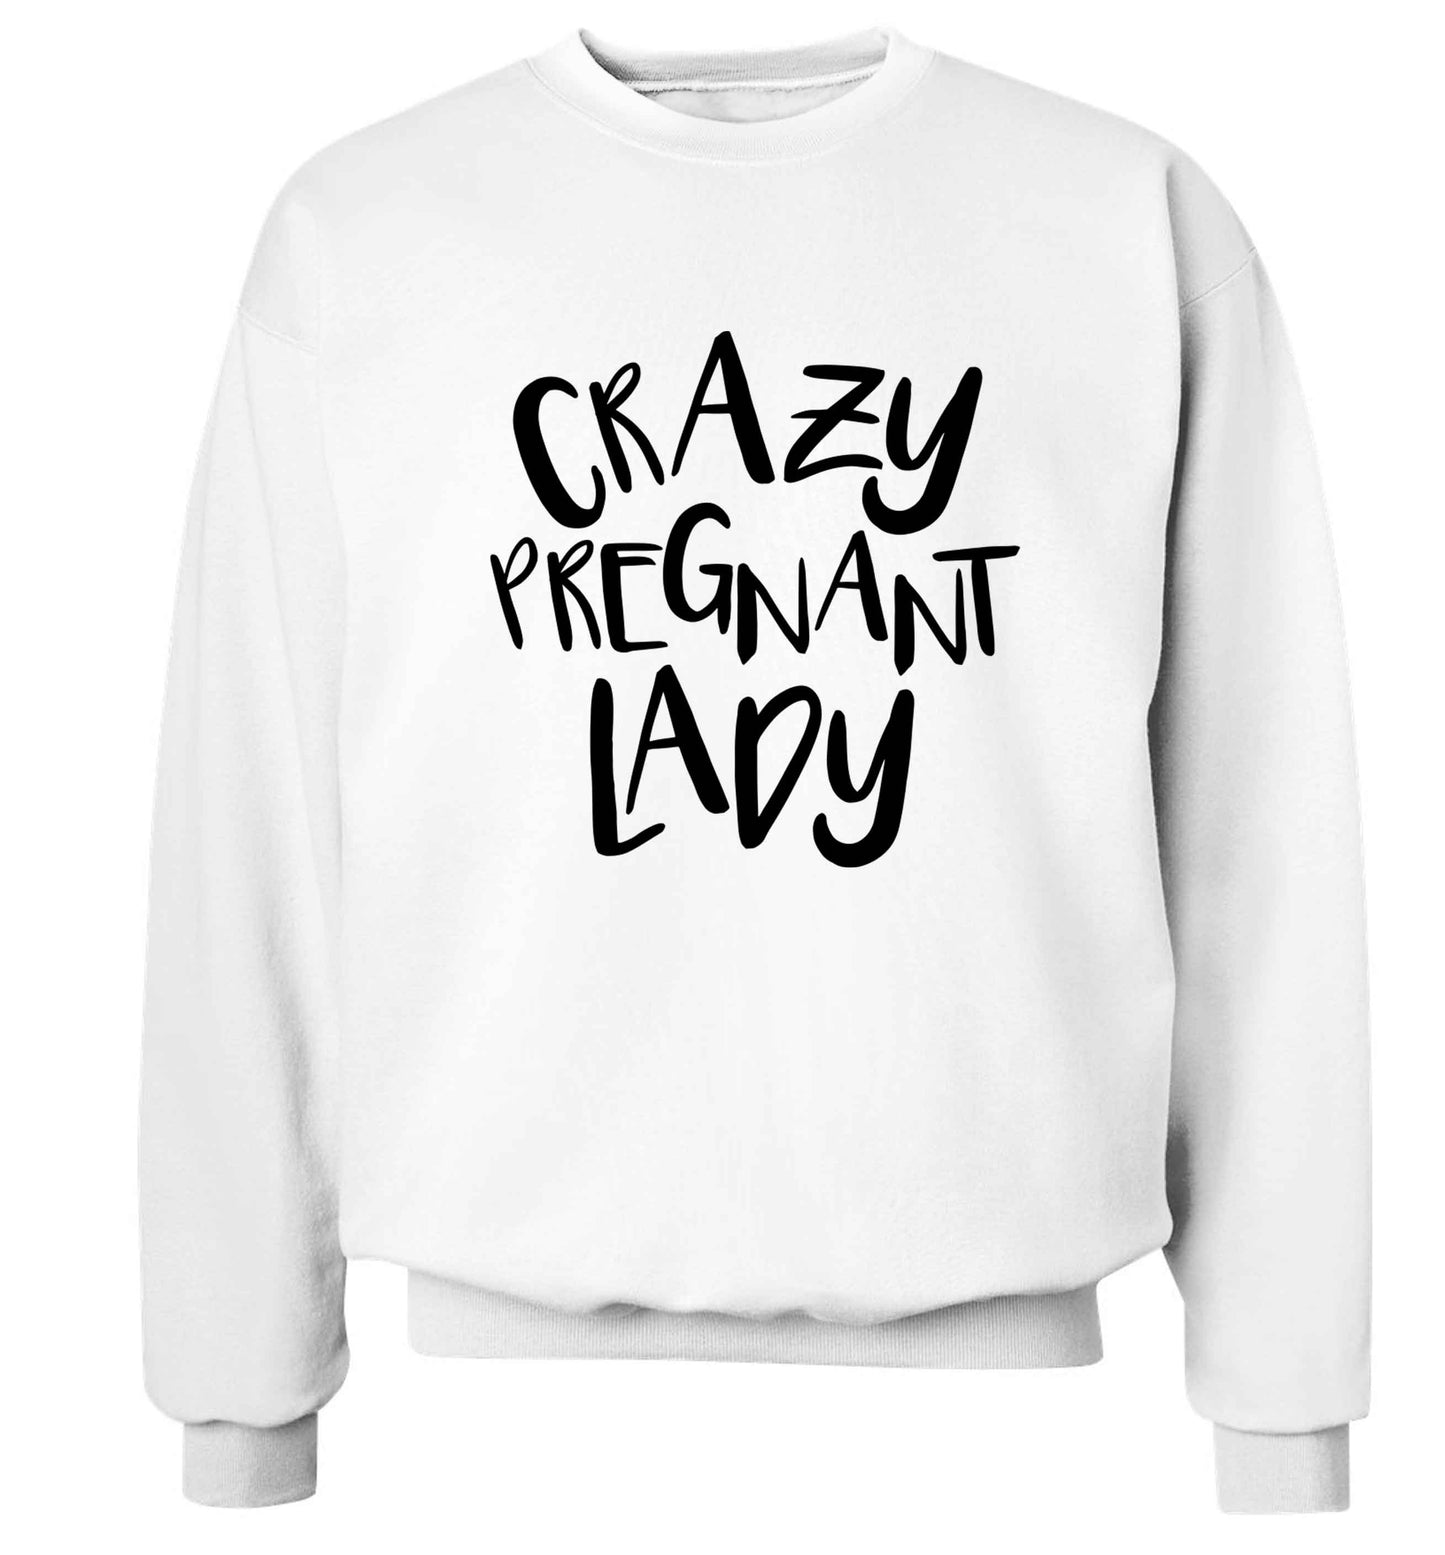 Crazy pregnant lady Adult's unisex white Sweater 2XL